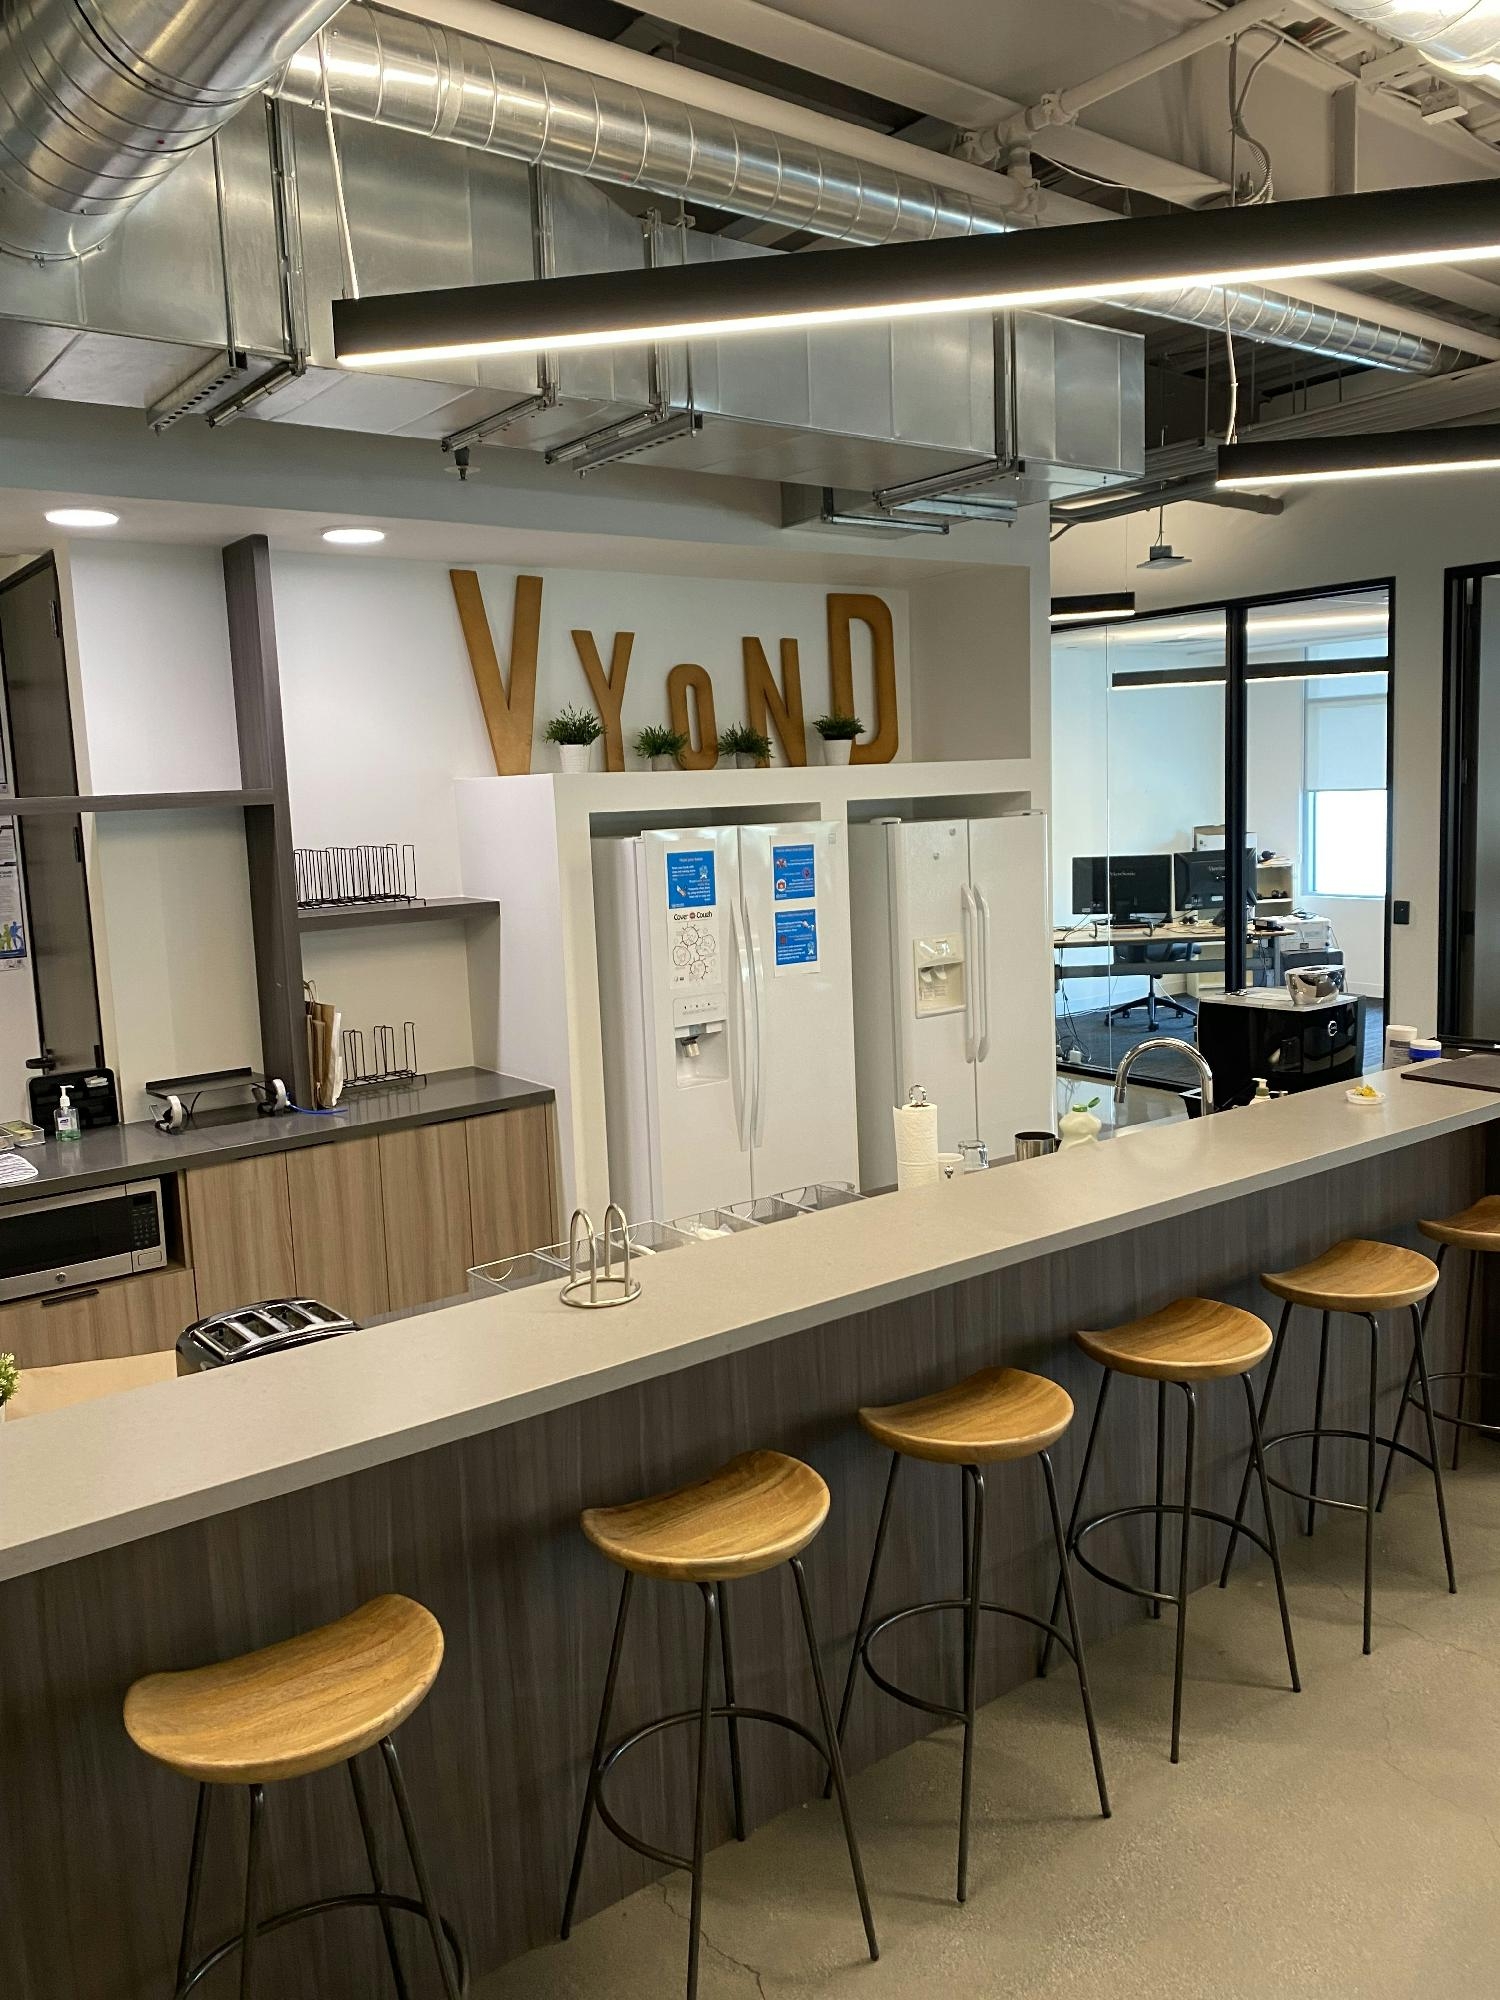 A photo of the kitchen at Vyond's US office